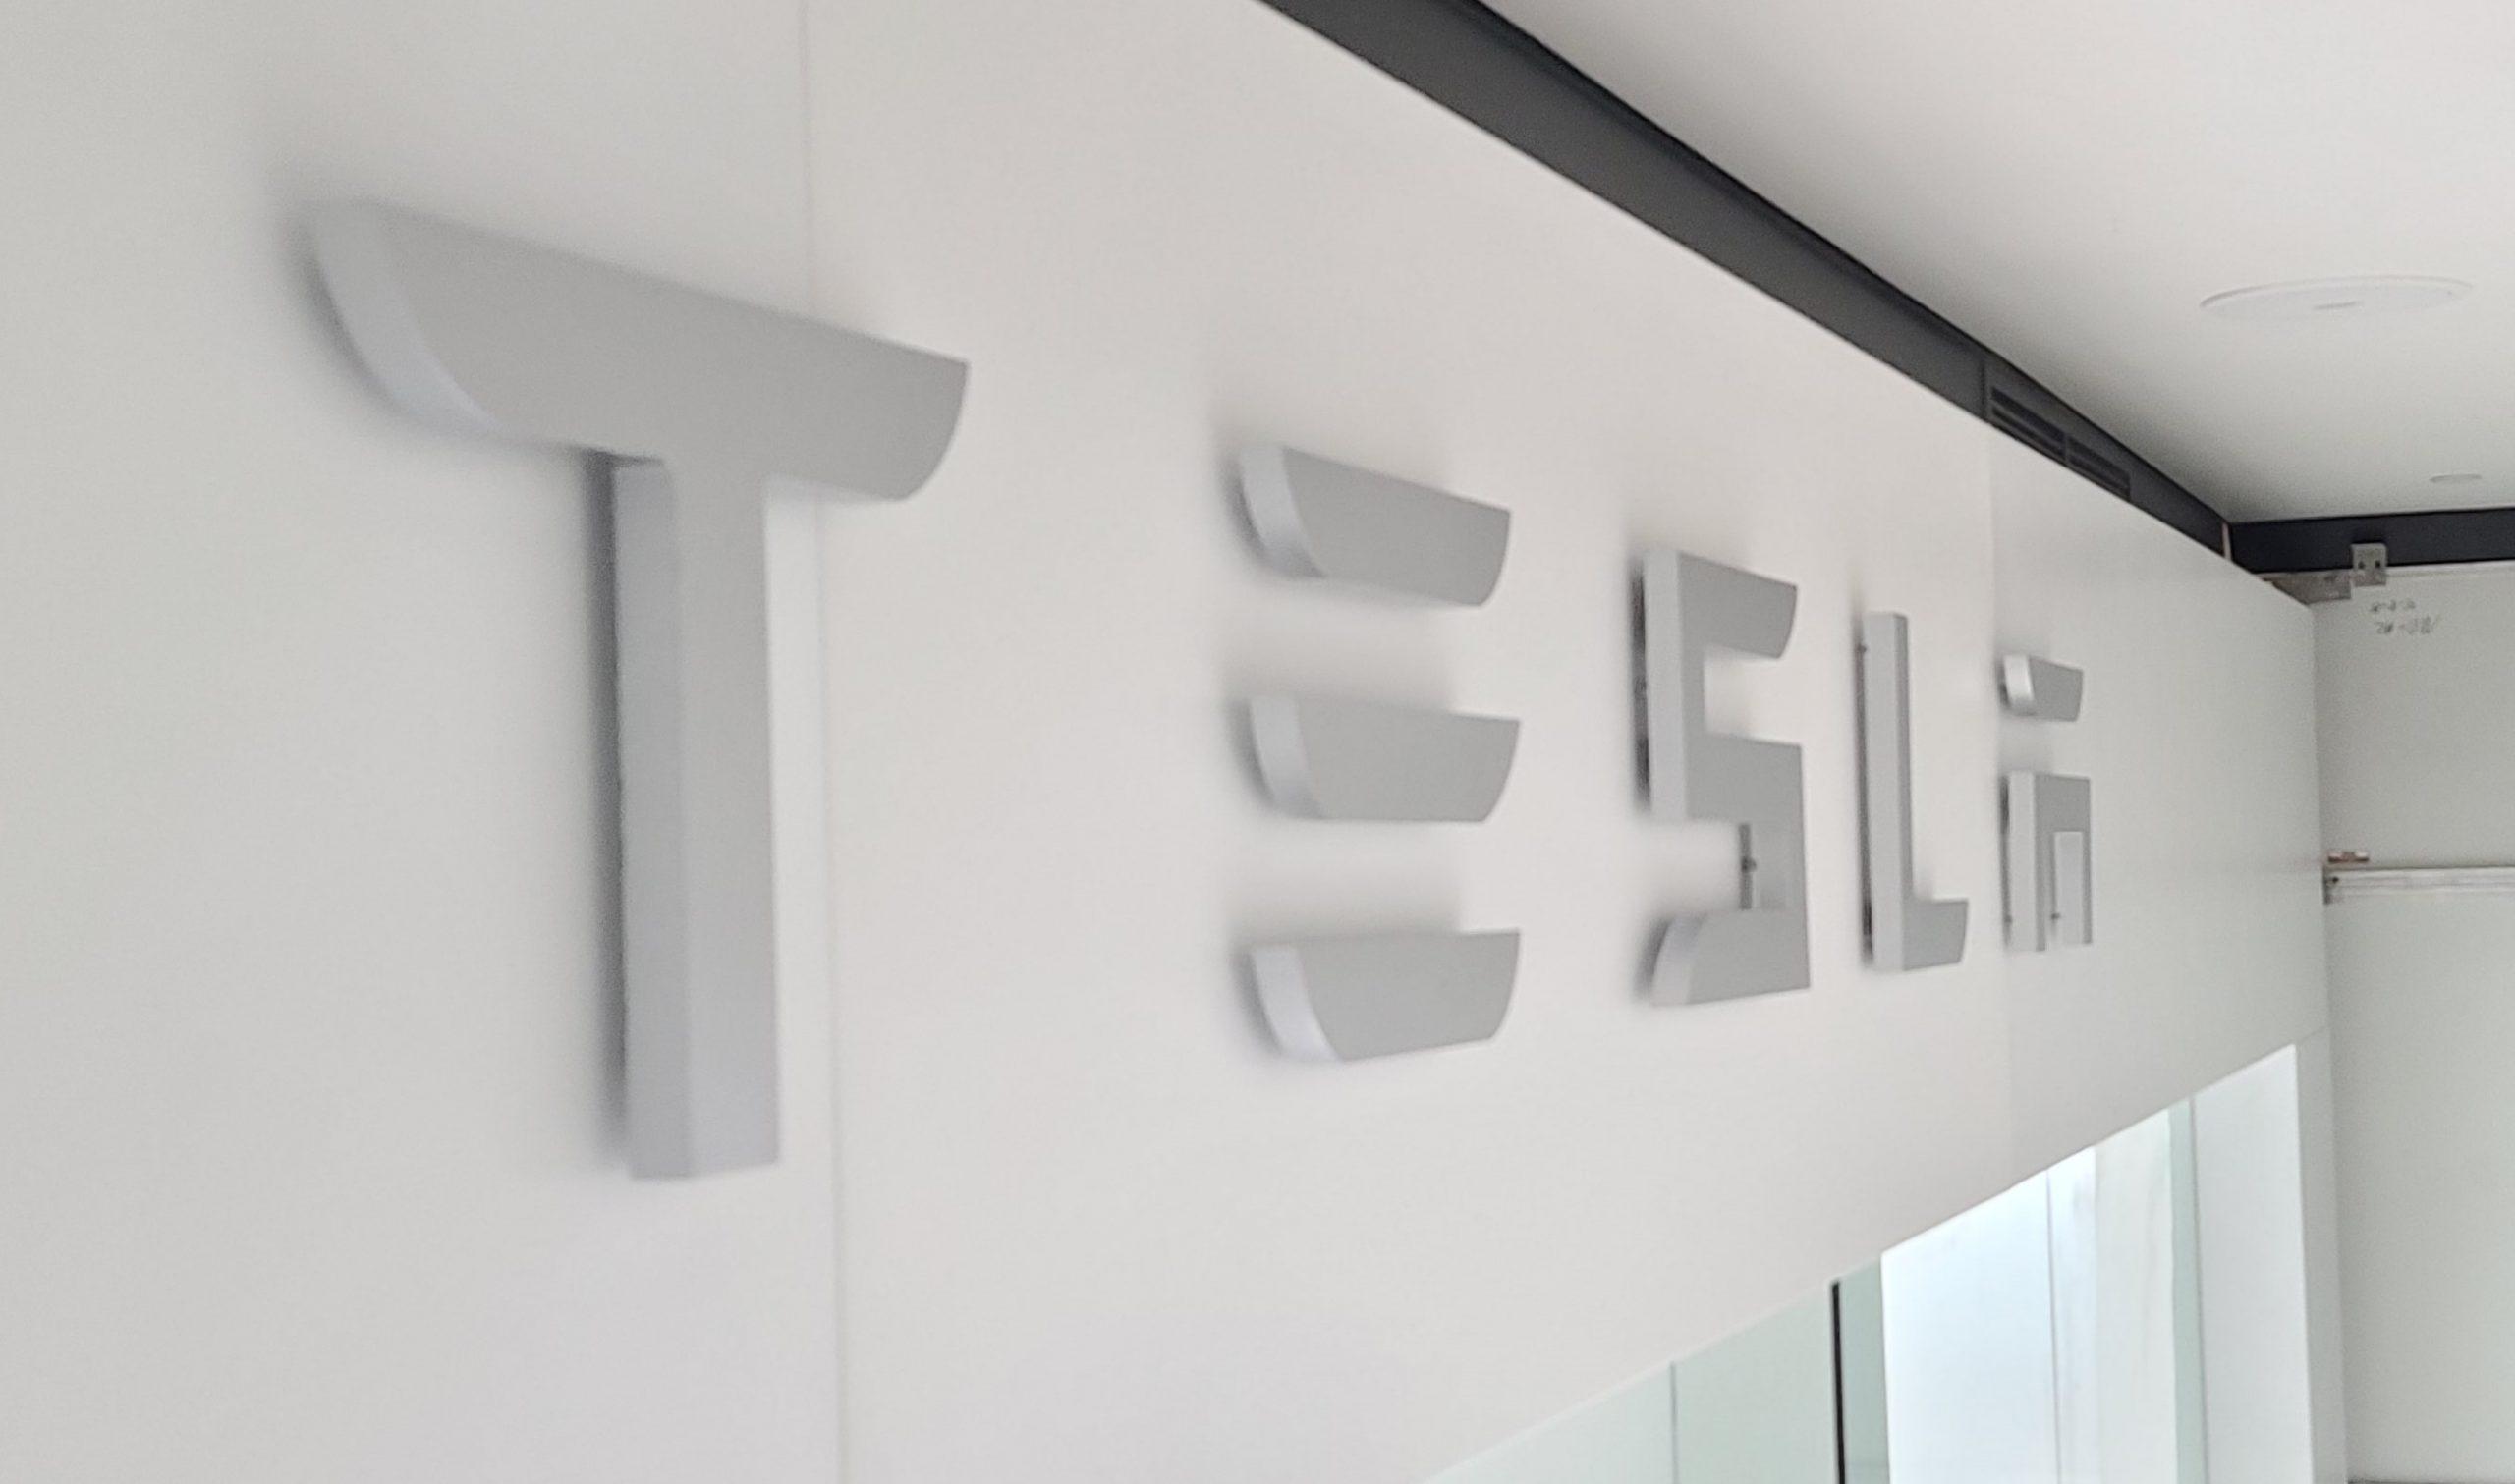 Car showrooms need impressive signage to help emphasize the vehicles being offered. Such as these interior dimensional letters for Tesla's Showroom in Torrance.